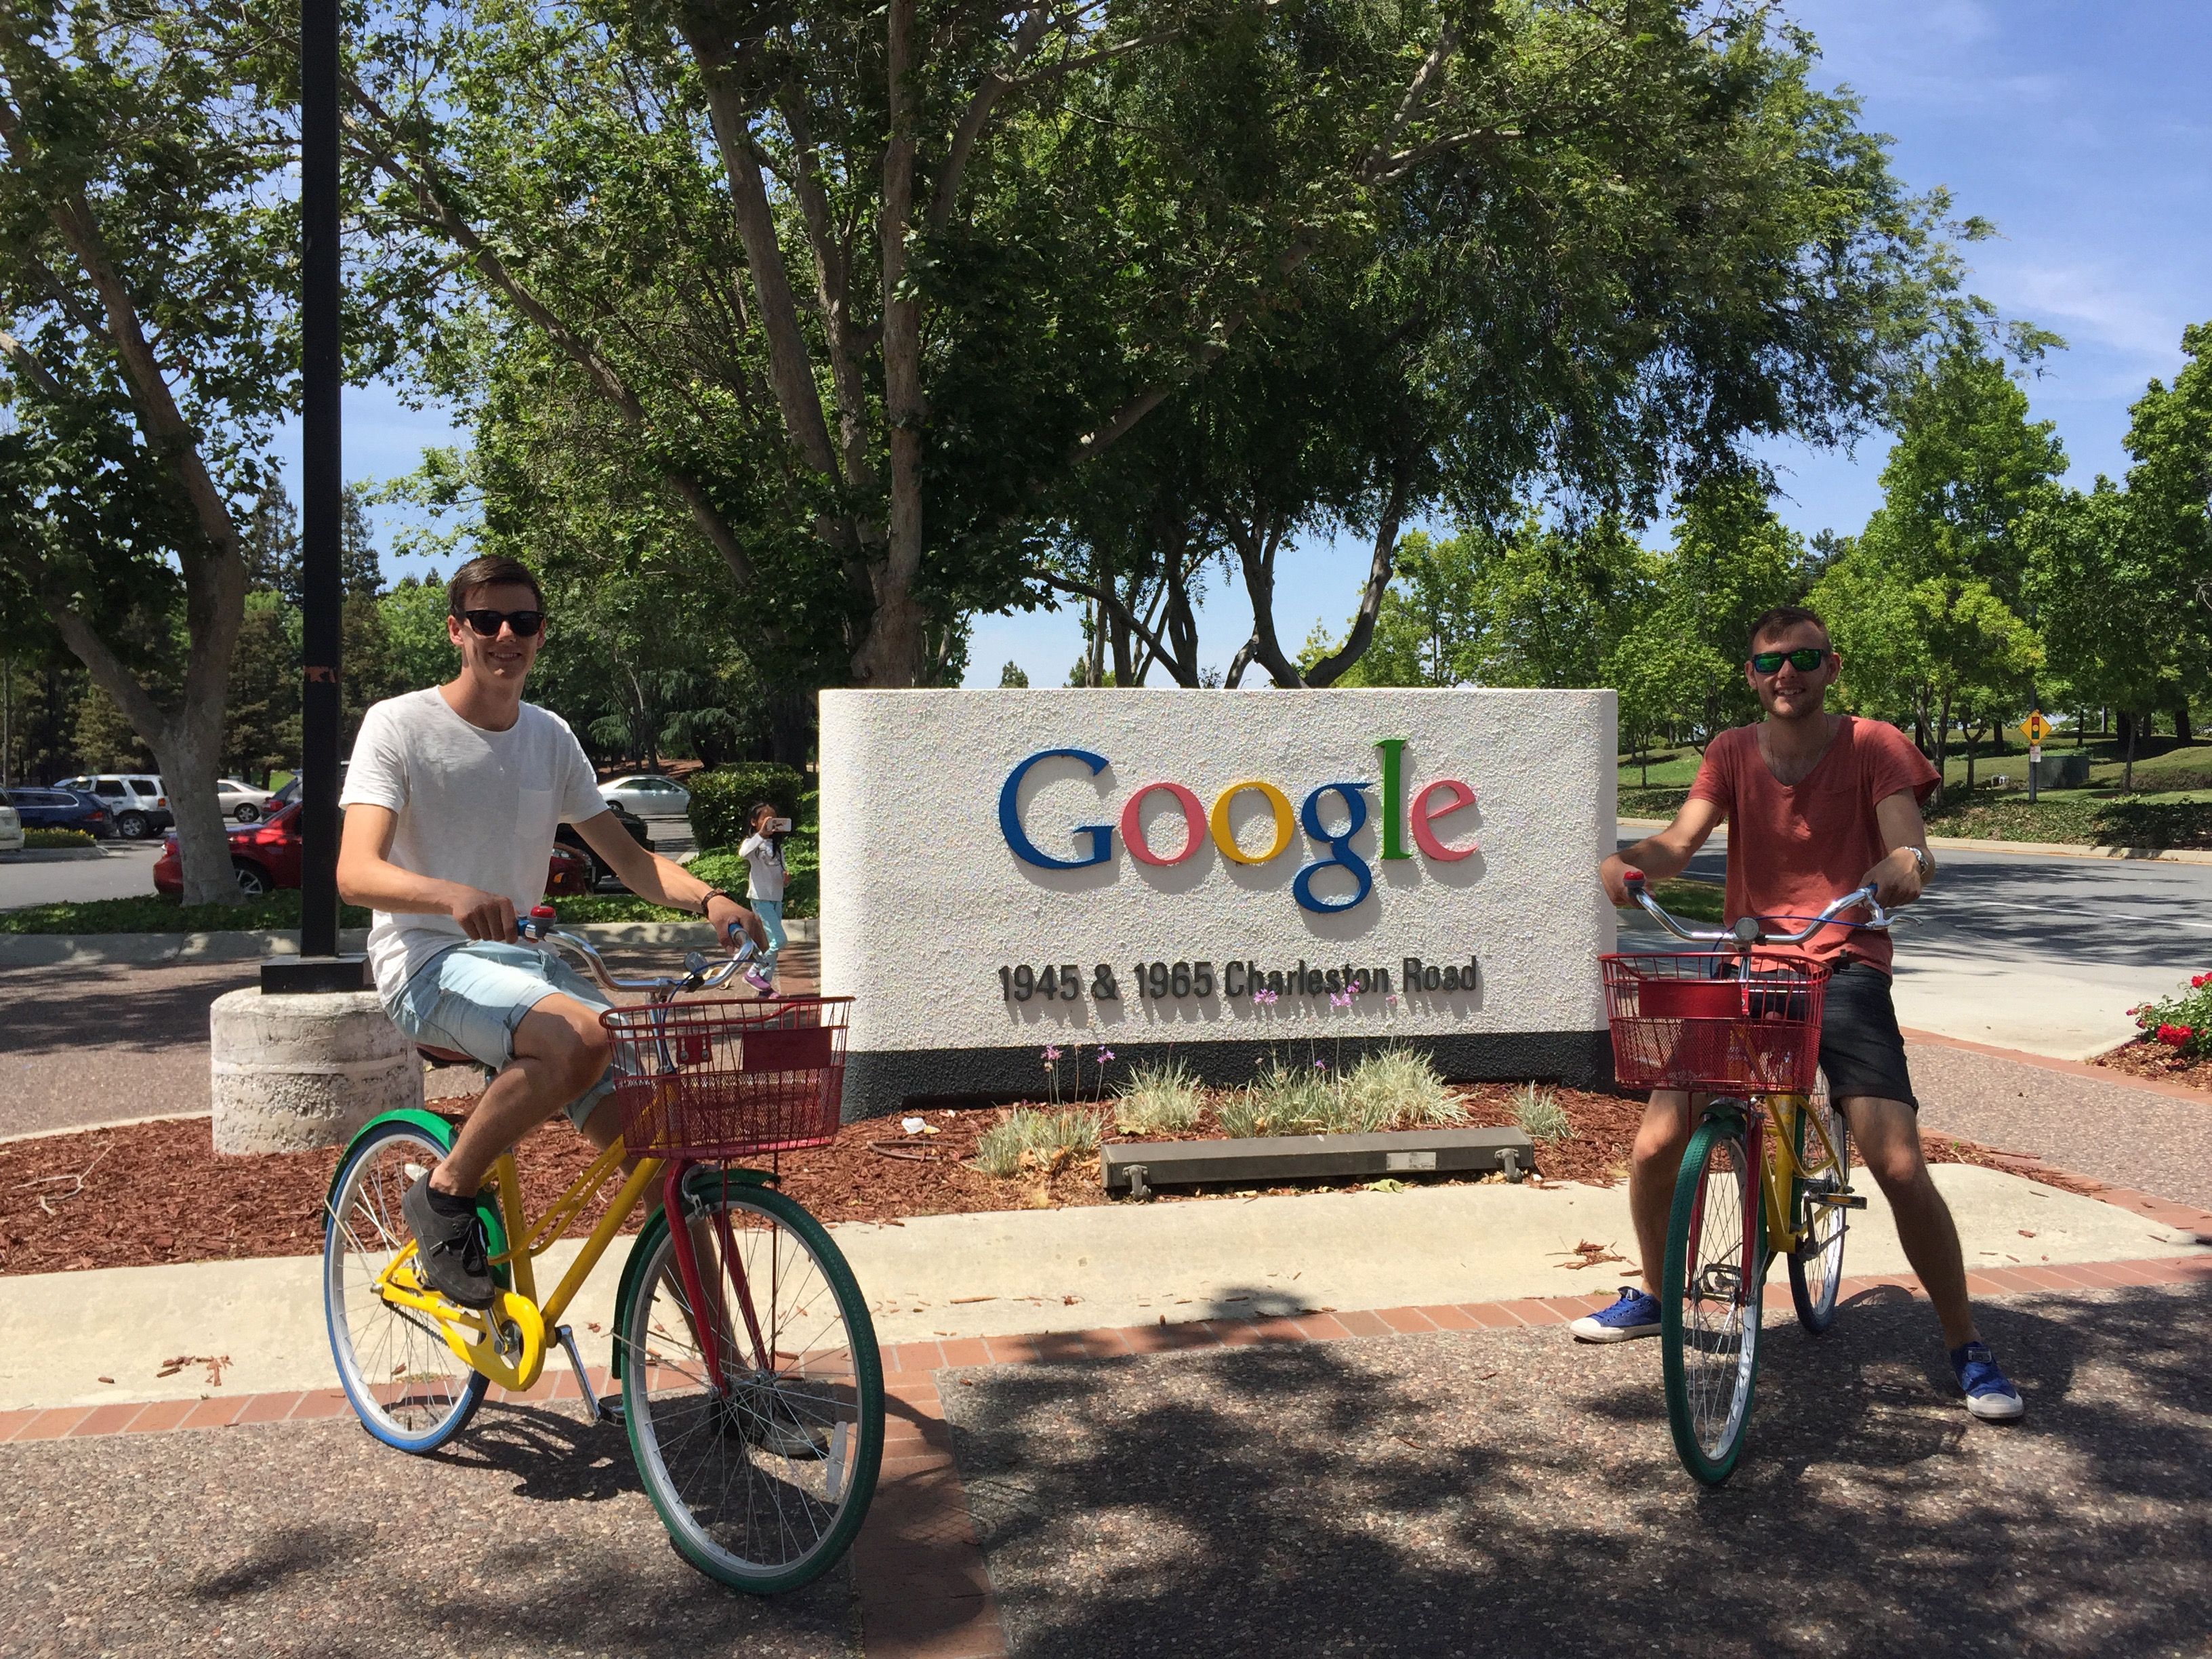 Rick and me on some bycicles at the Google campus.